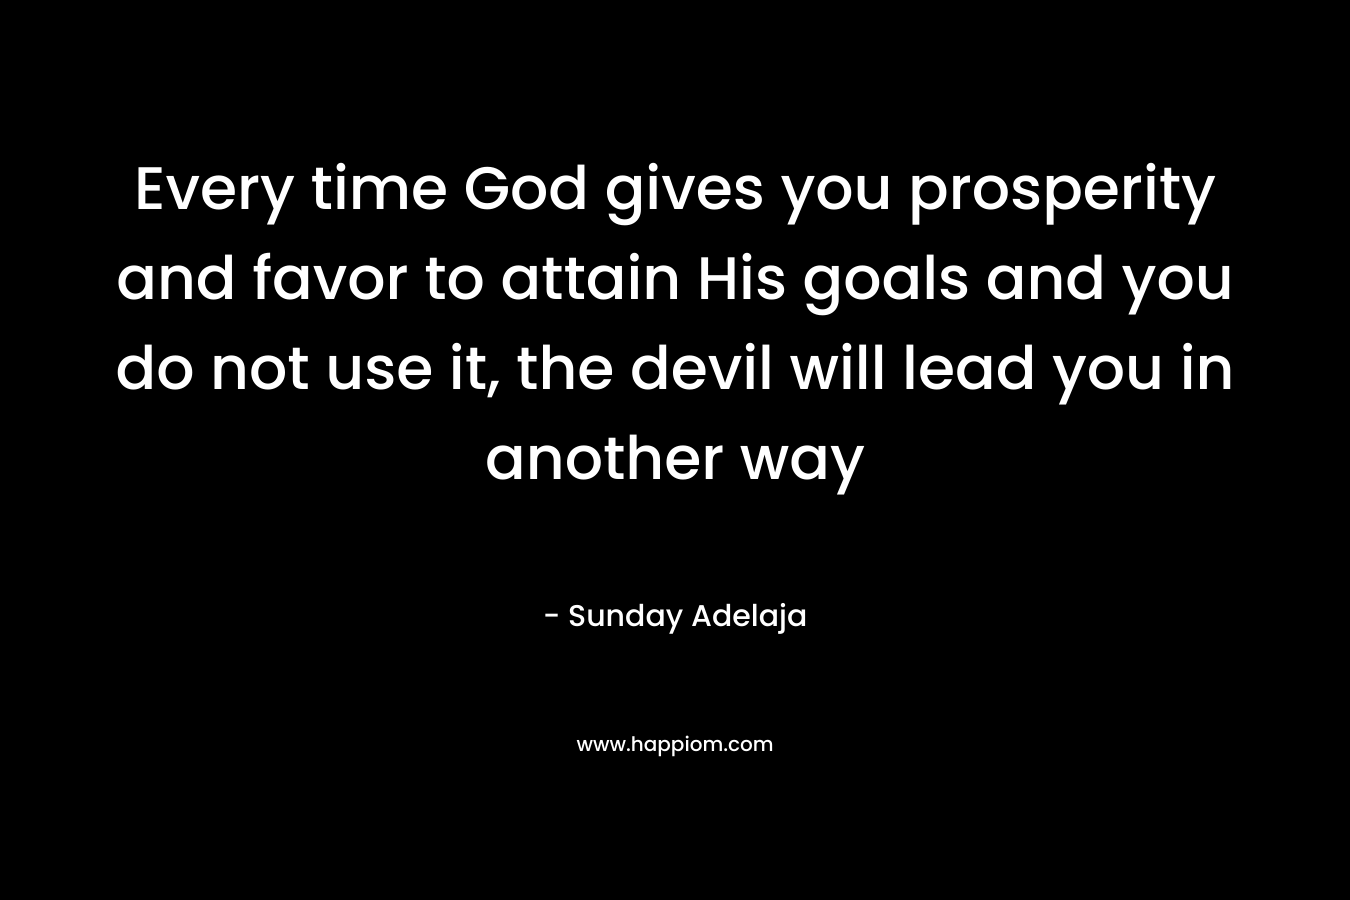 Every time God gives you prosperity and favor to attain His goals and you do not use it, the devil will lead you in another way